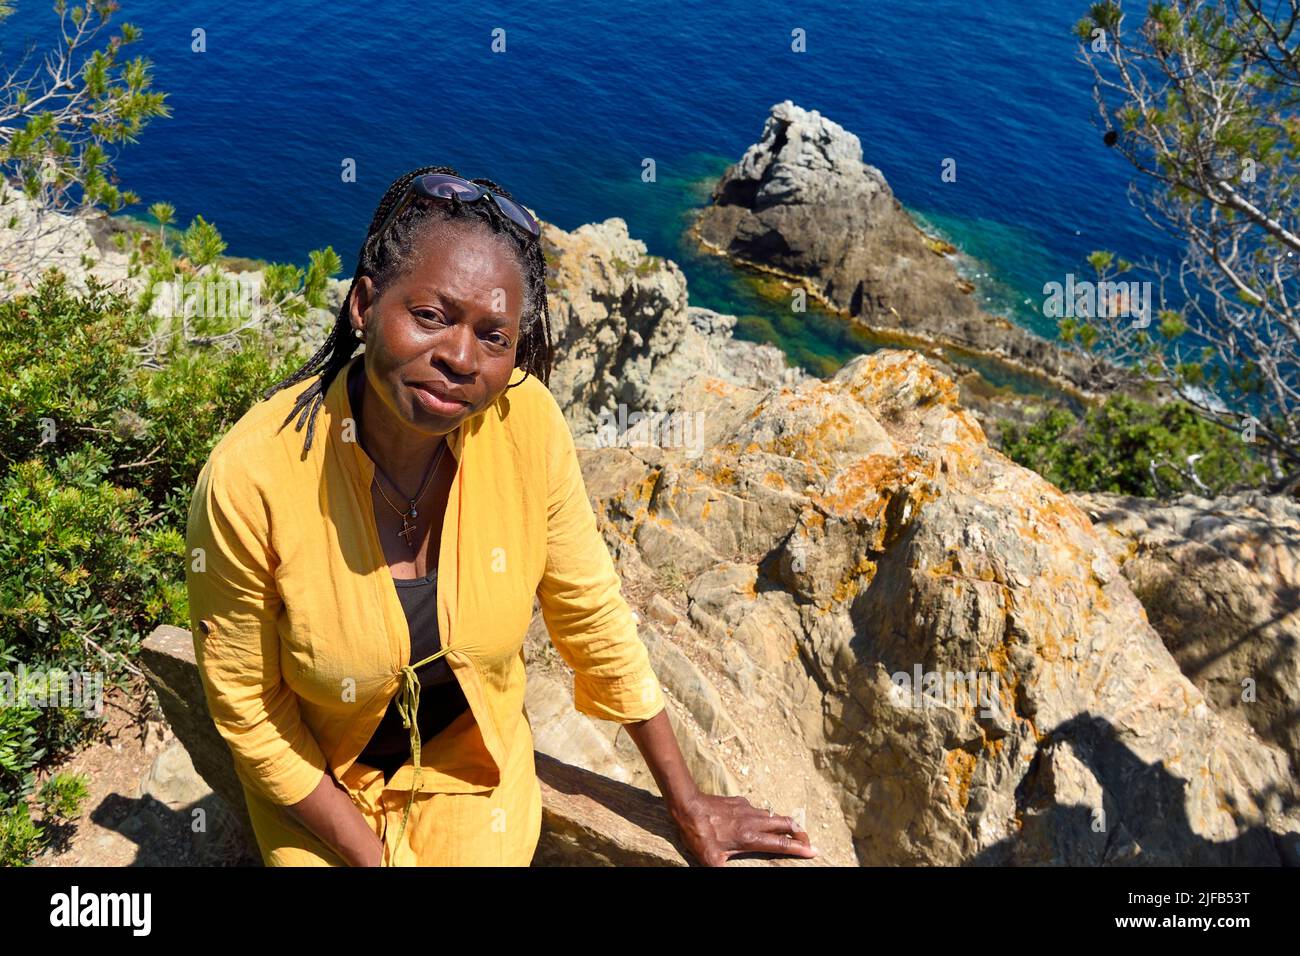 France, Var, Iles d'Hyeres, Parc National de Port Cros (National park of Port Cros), Porquerolles island, cap d'Arme, the writer and journalist Marie-Joséphine de Clercq who lives and works in the Island Stock Photo